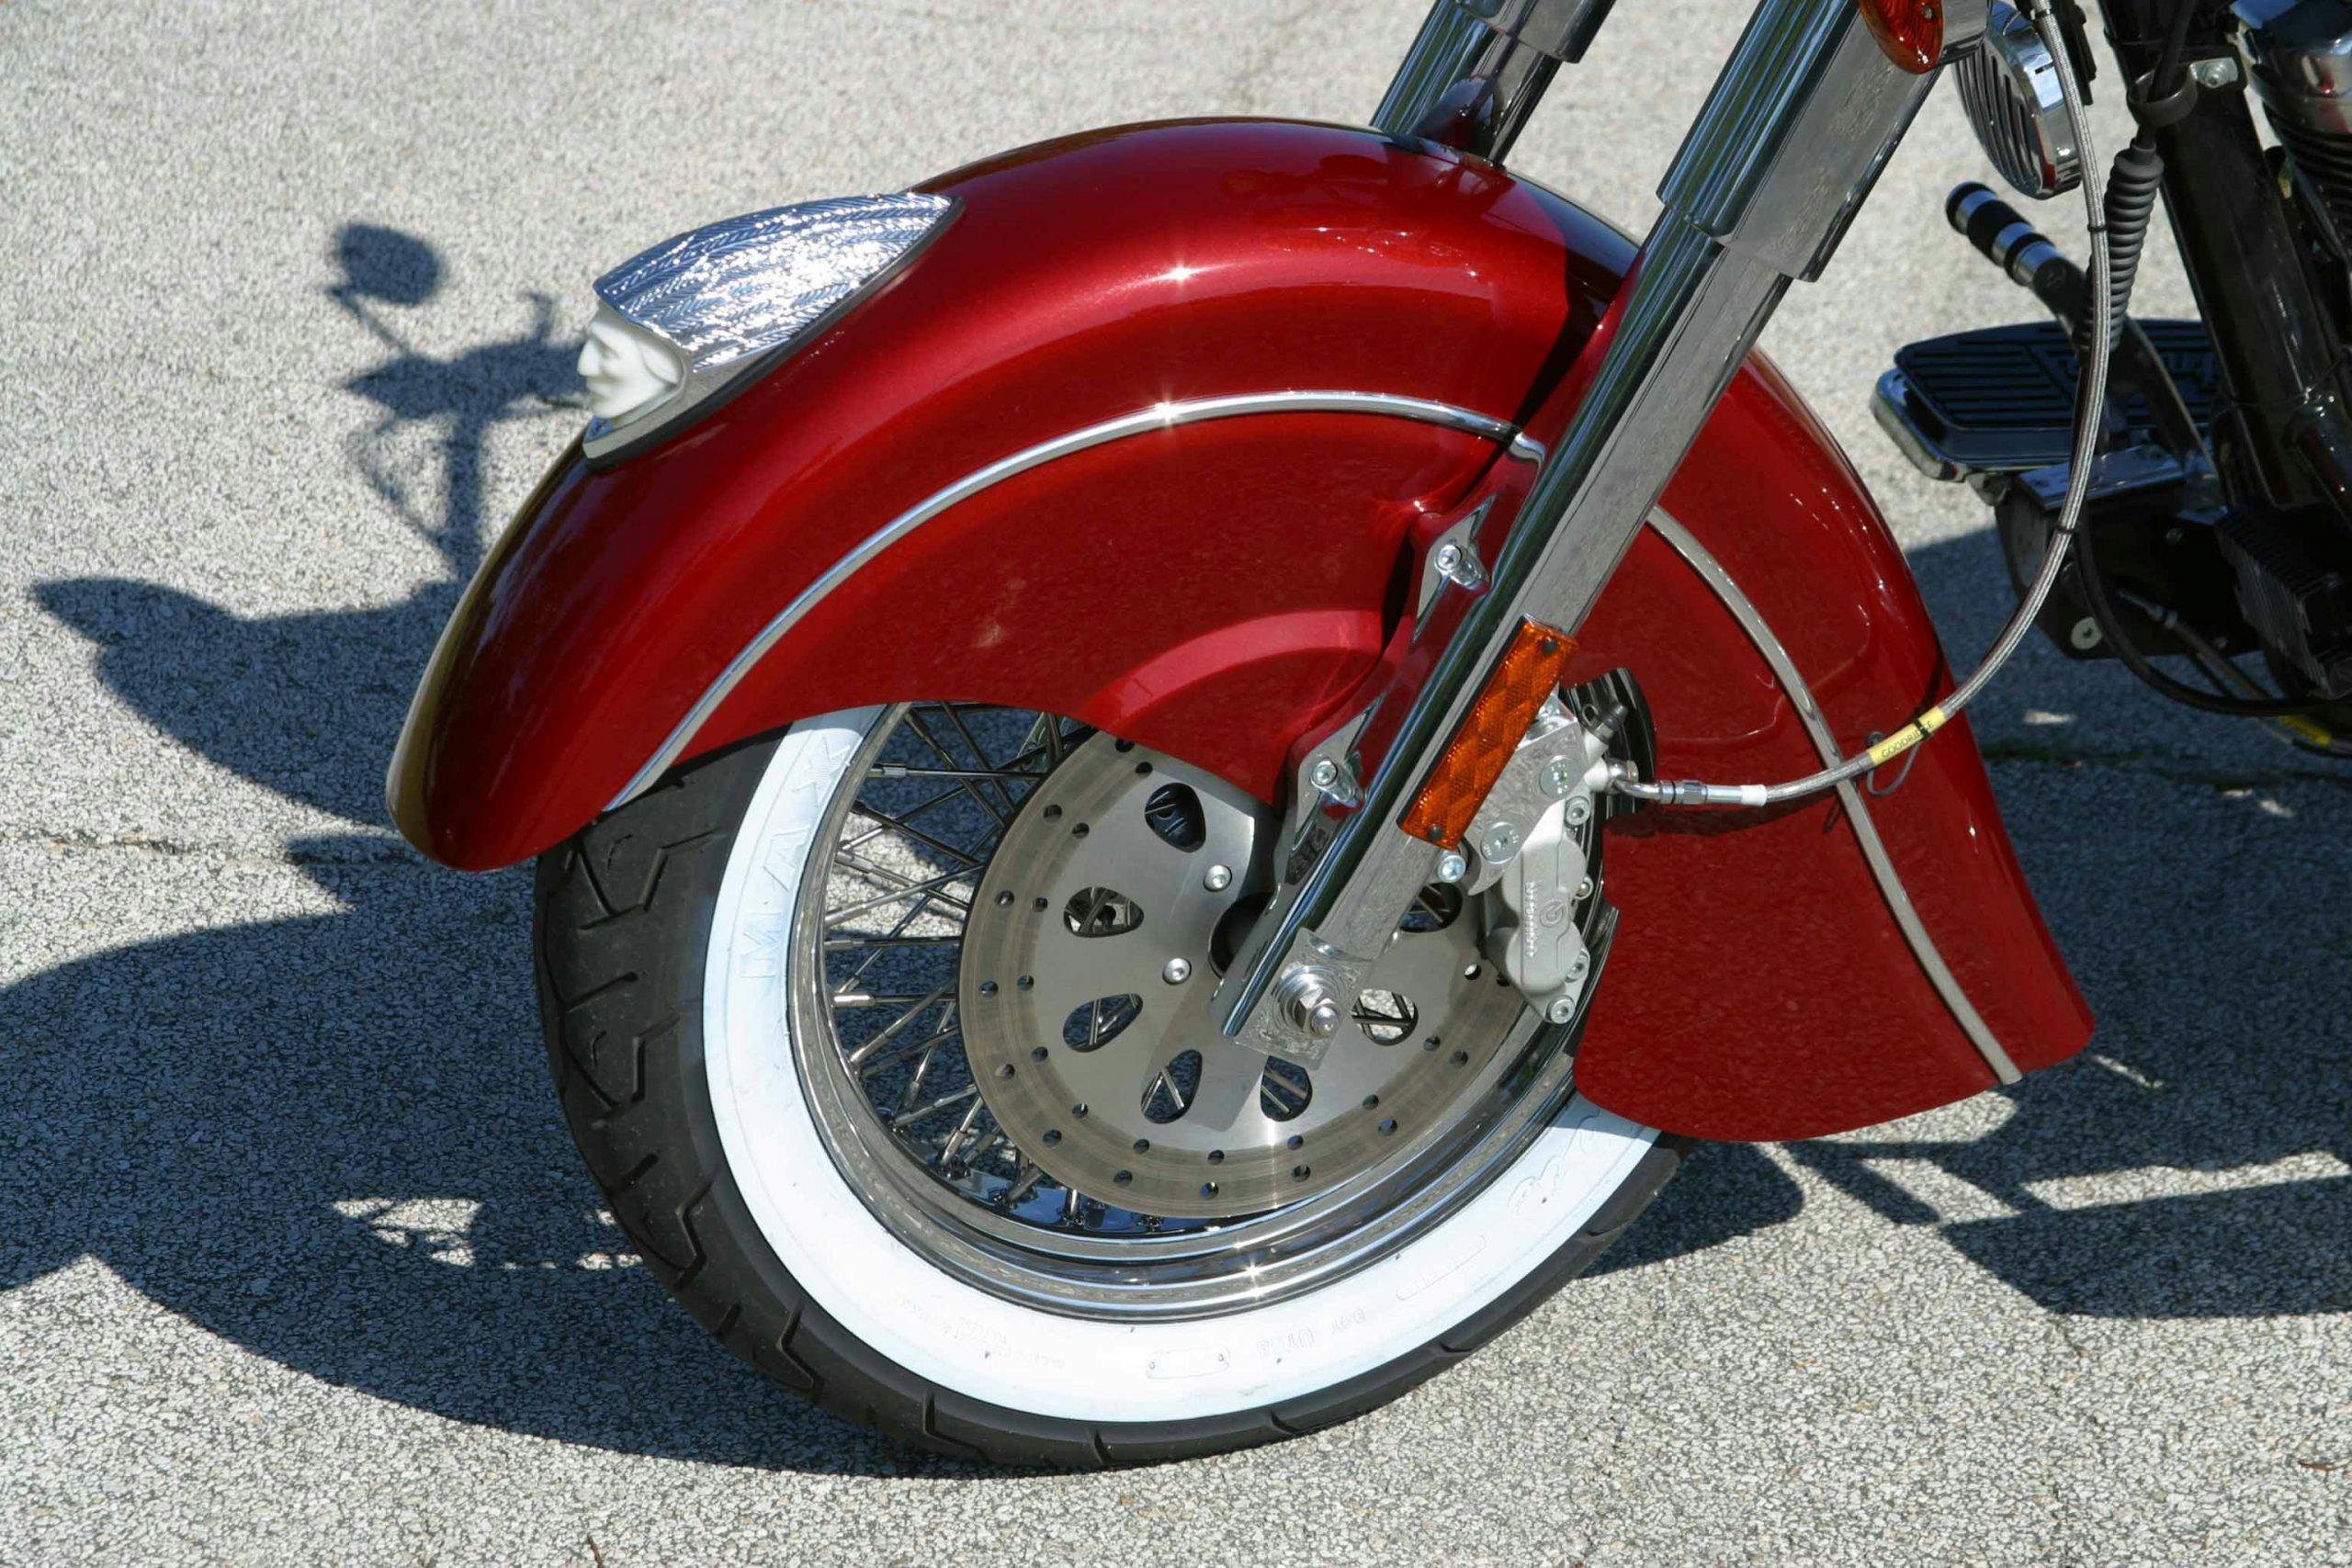 Indian Chief motorcycle front wheel